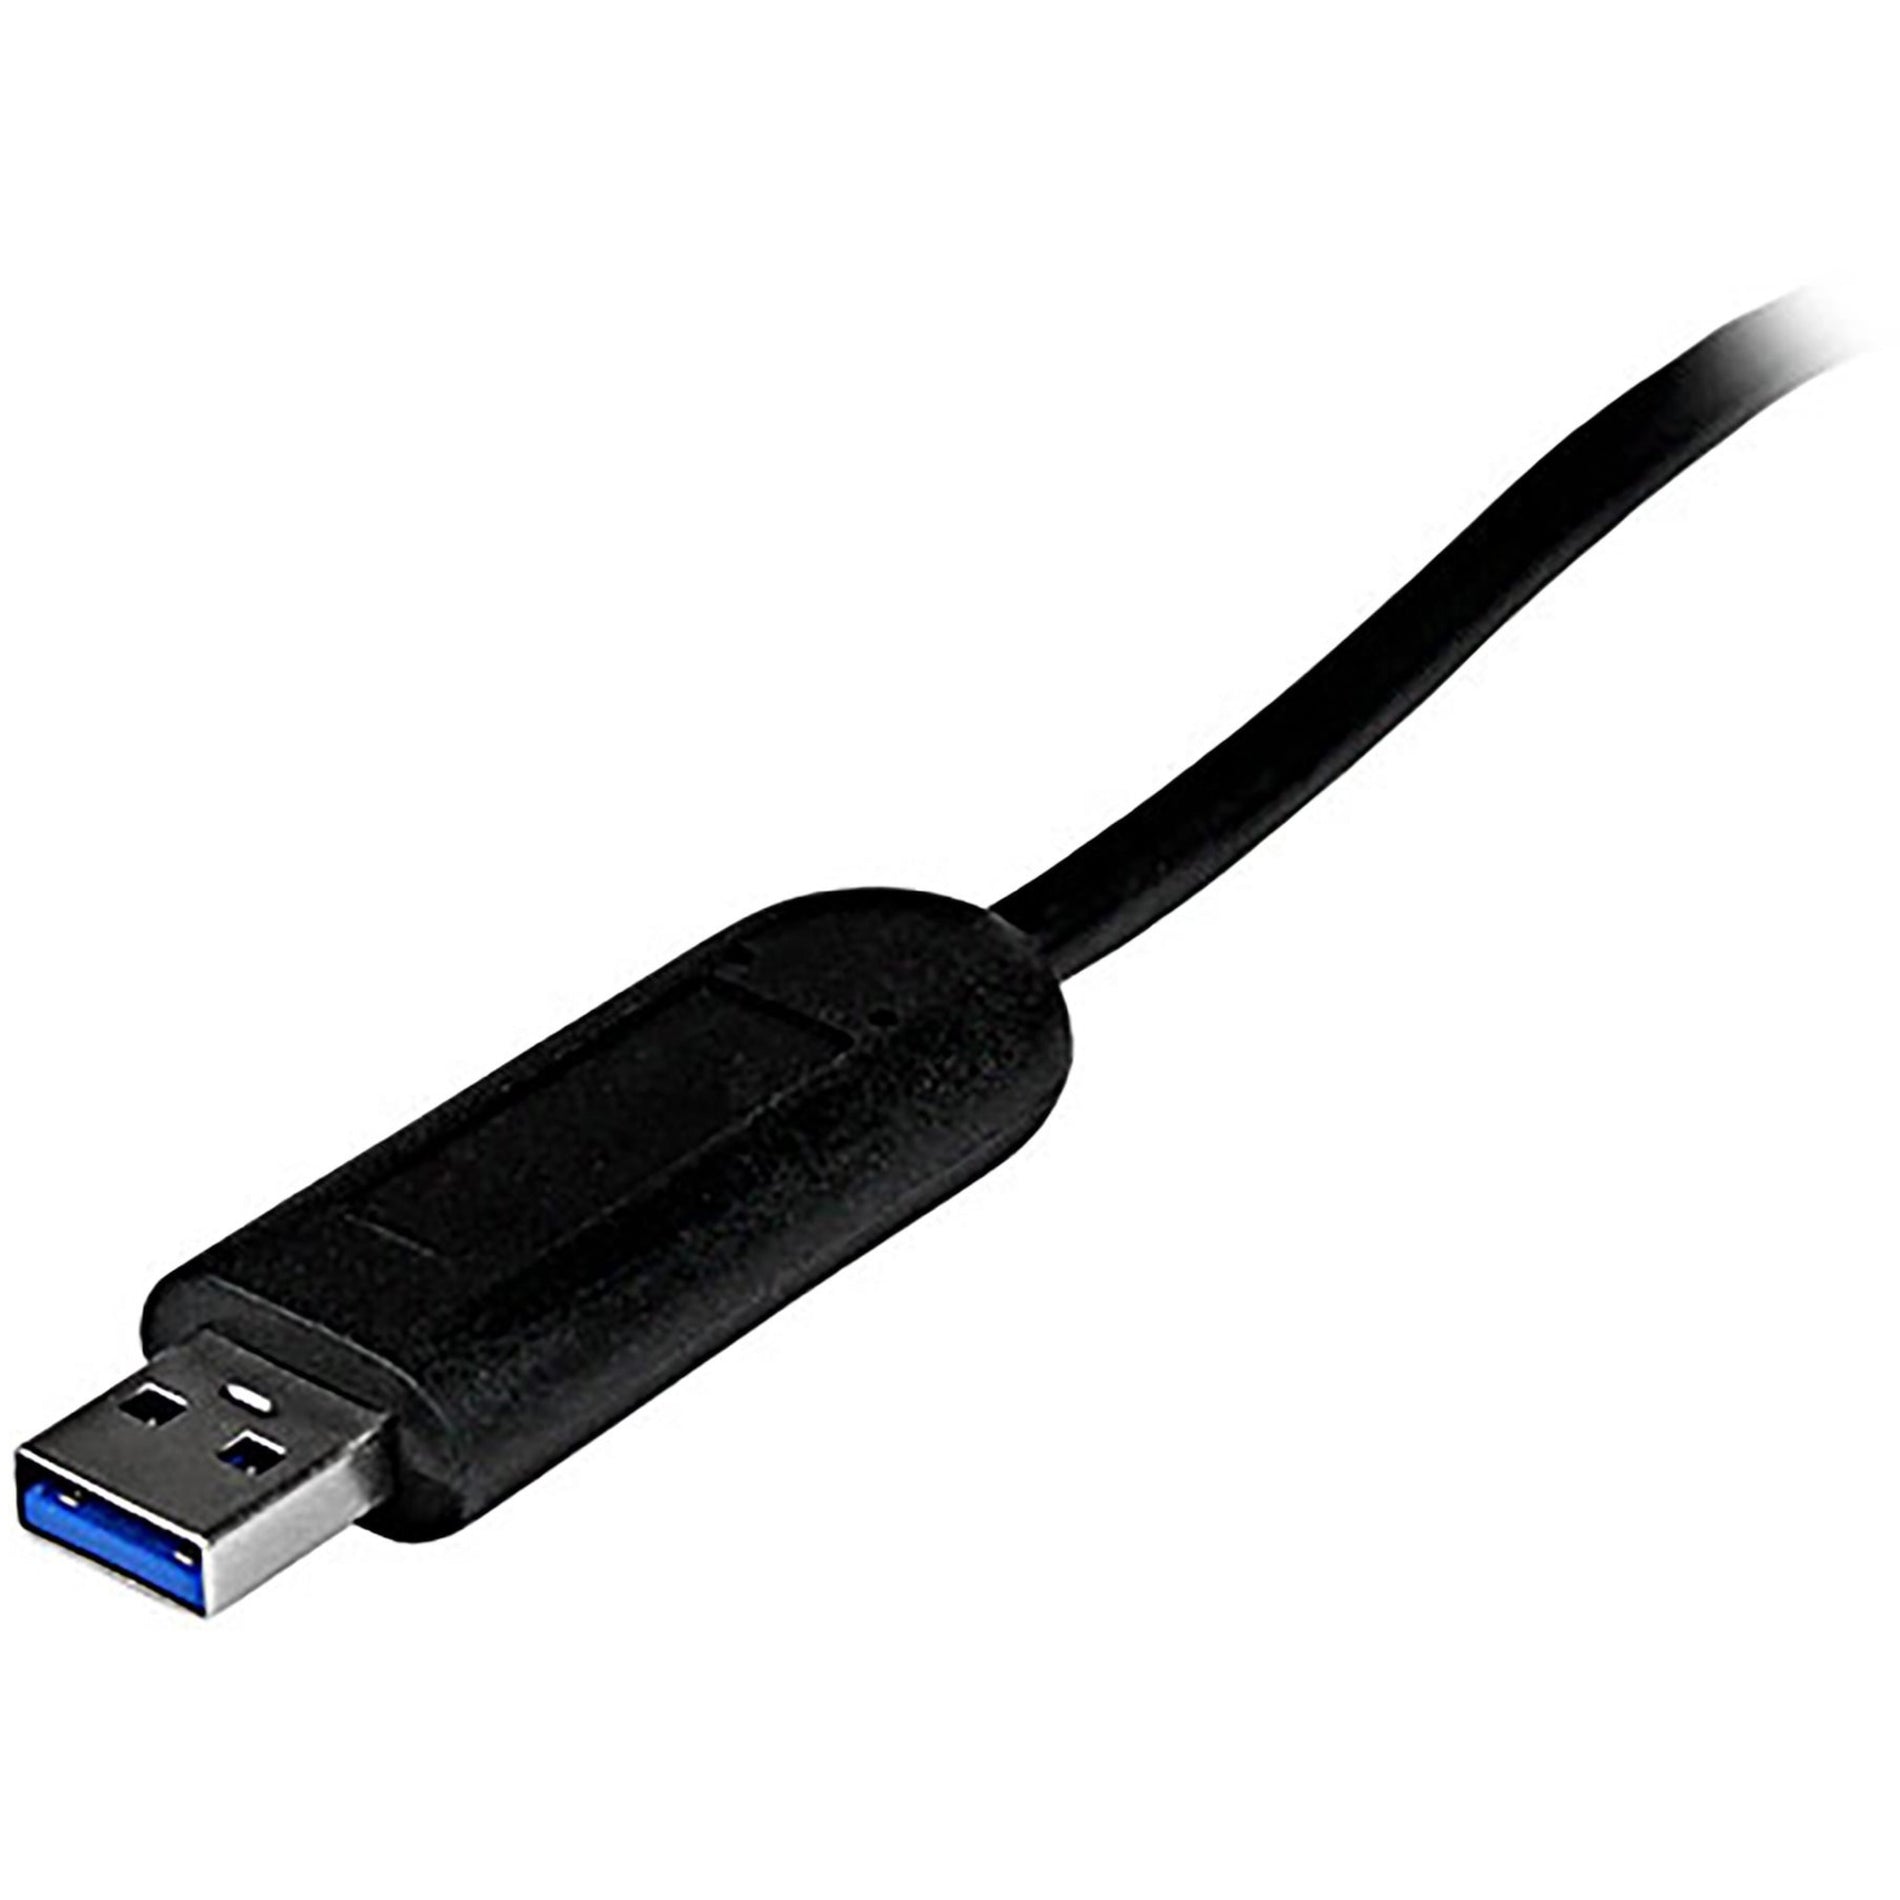 StarTech.com ST4300PBU3 4 Port Portable SuperSpeed USB 3.0 Hub with Built-in Cable, Expand Your USB Connectivity